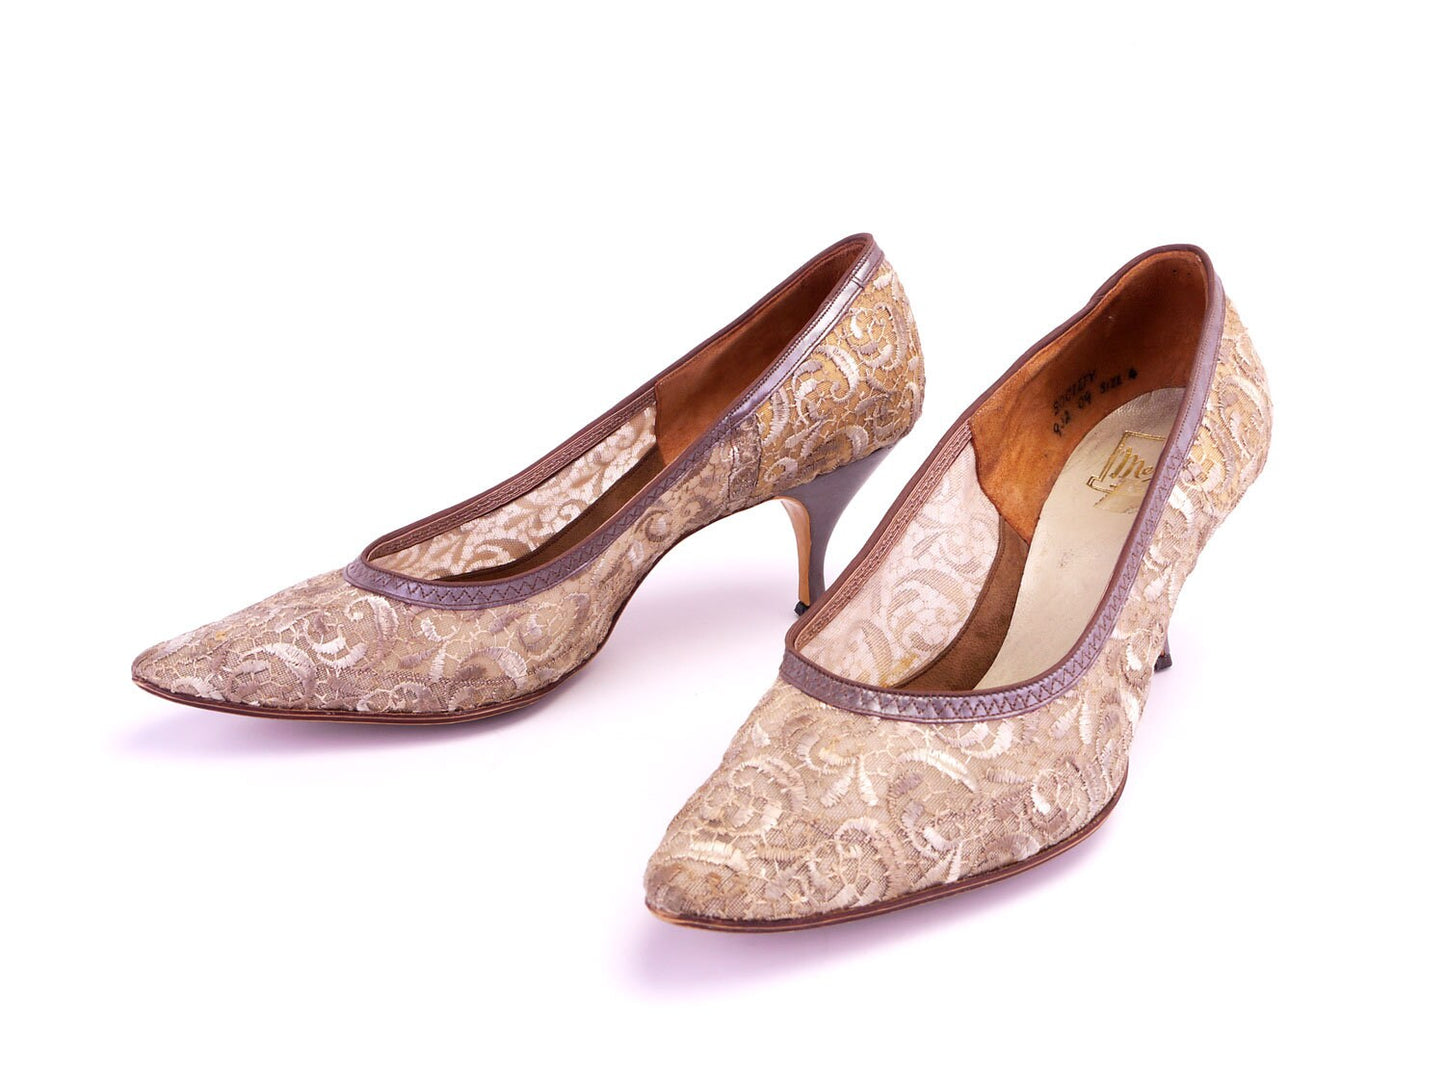 Medway 1960s Beige and Bronze Lace Court Shoes Pumps UK 4